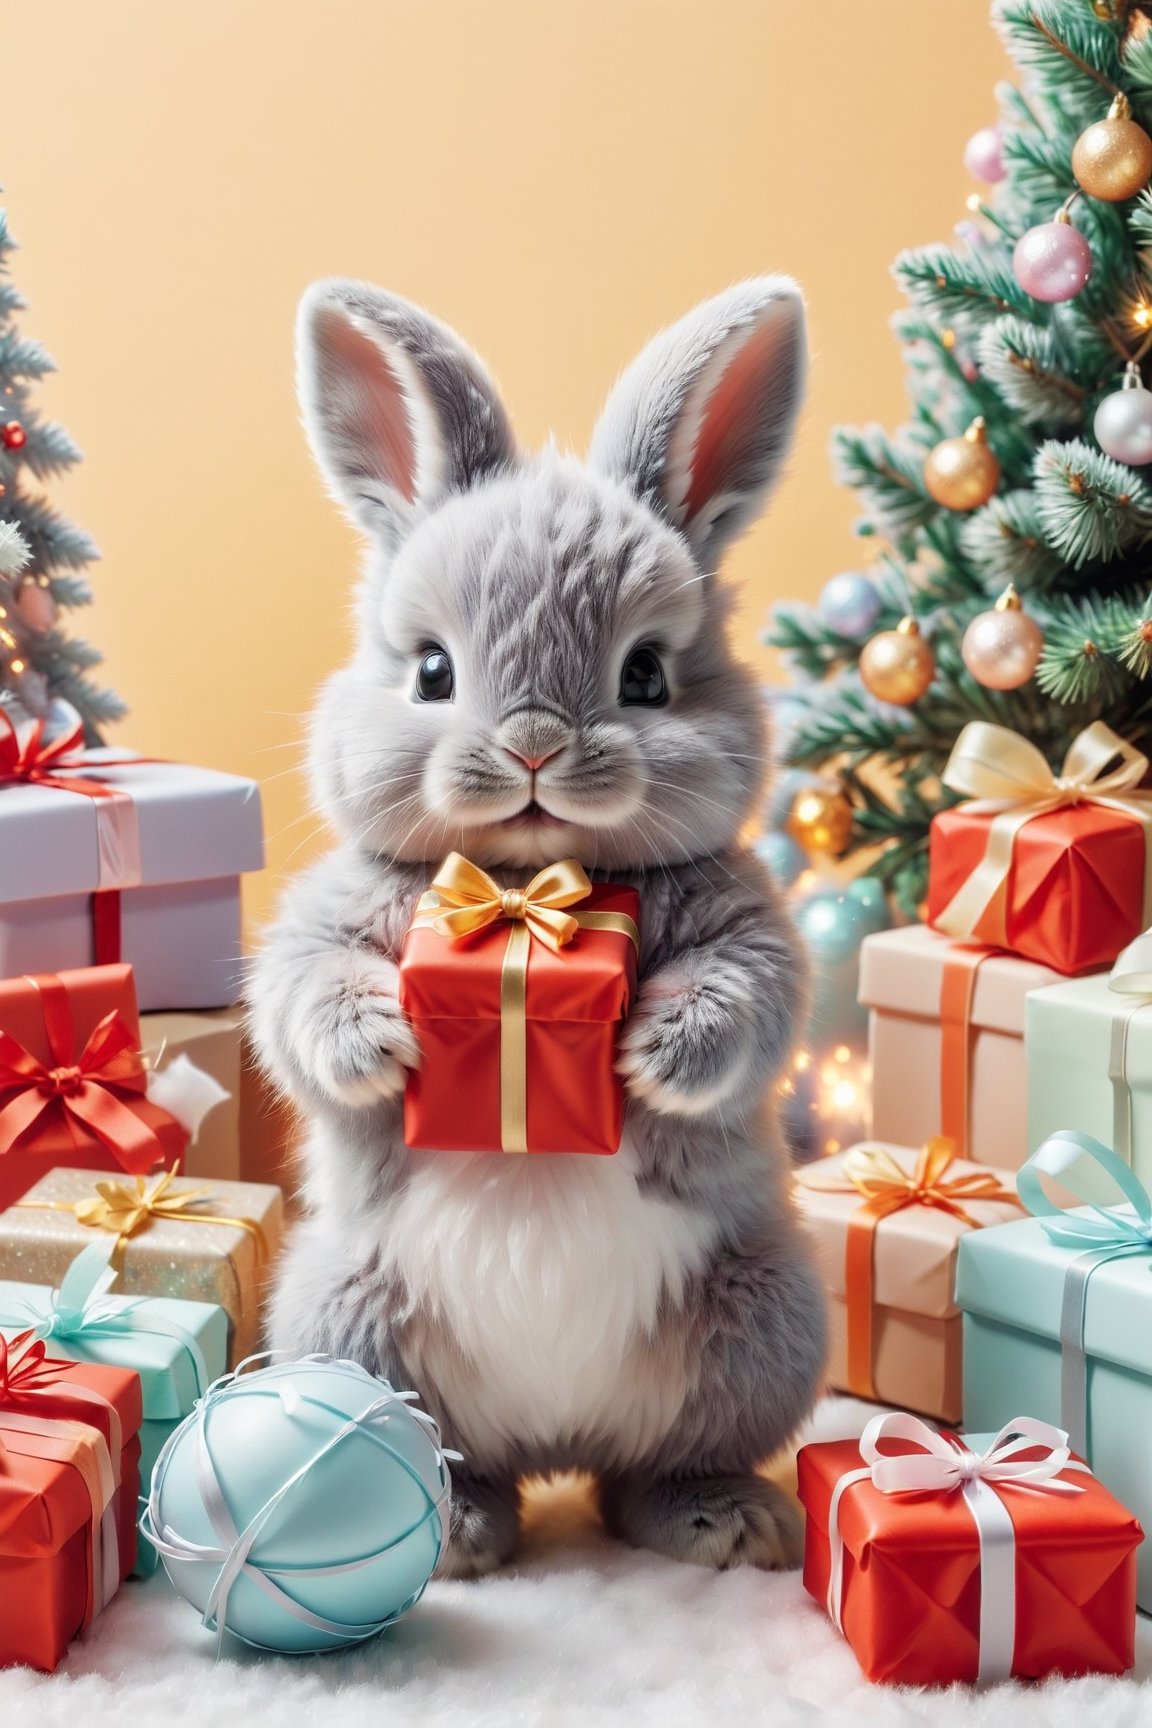 Fluffy baby grey bunny opening gifts for Christmas, pastel colors, complementary colors